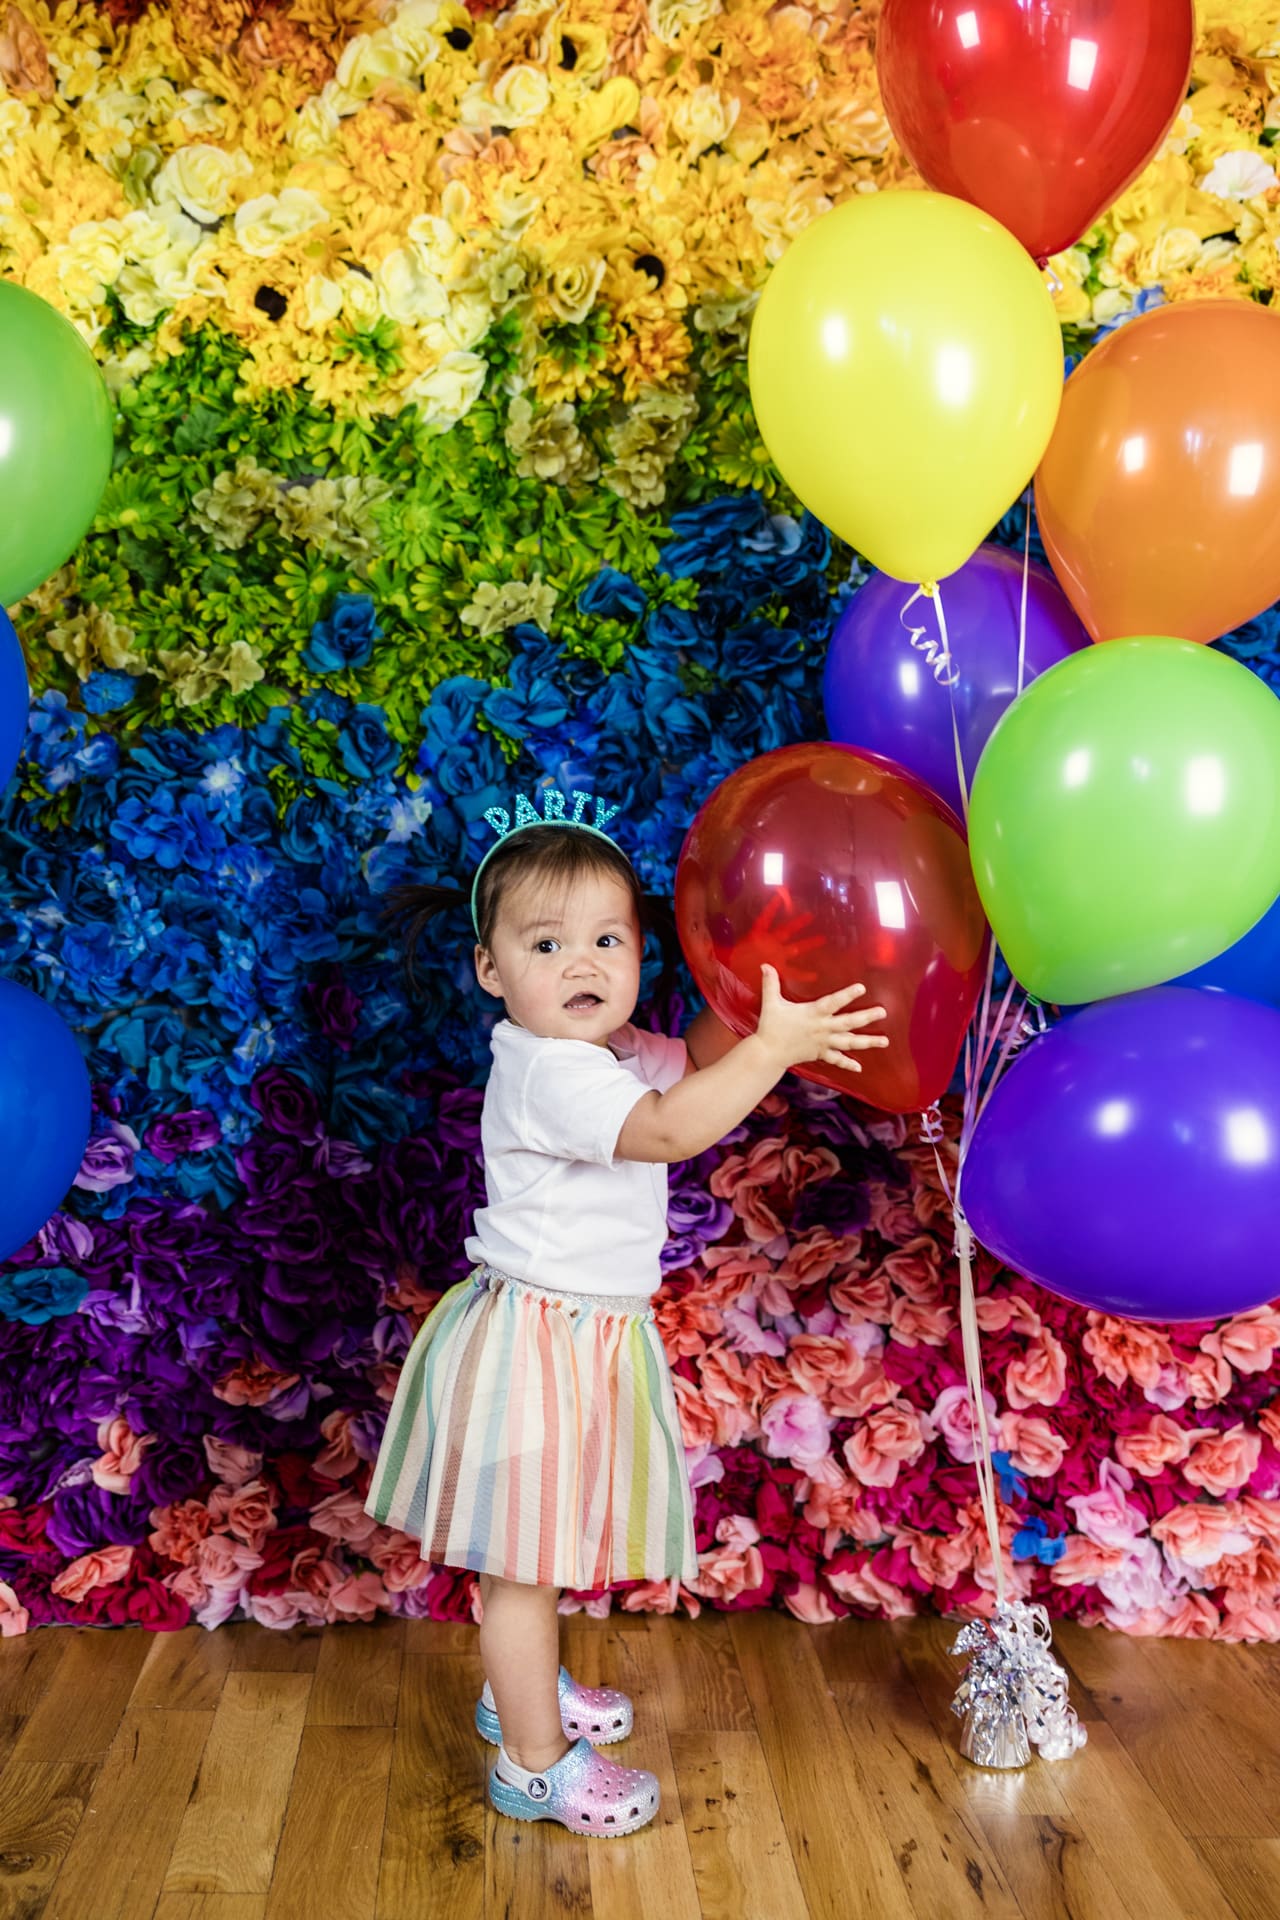 Candid photo of toddler holding red balloon in front of rainbow flower wall during birthday party photoshoot at Chicago photography studio P&M Studio